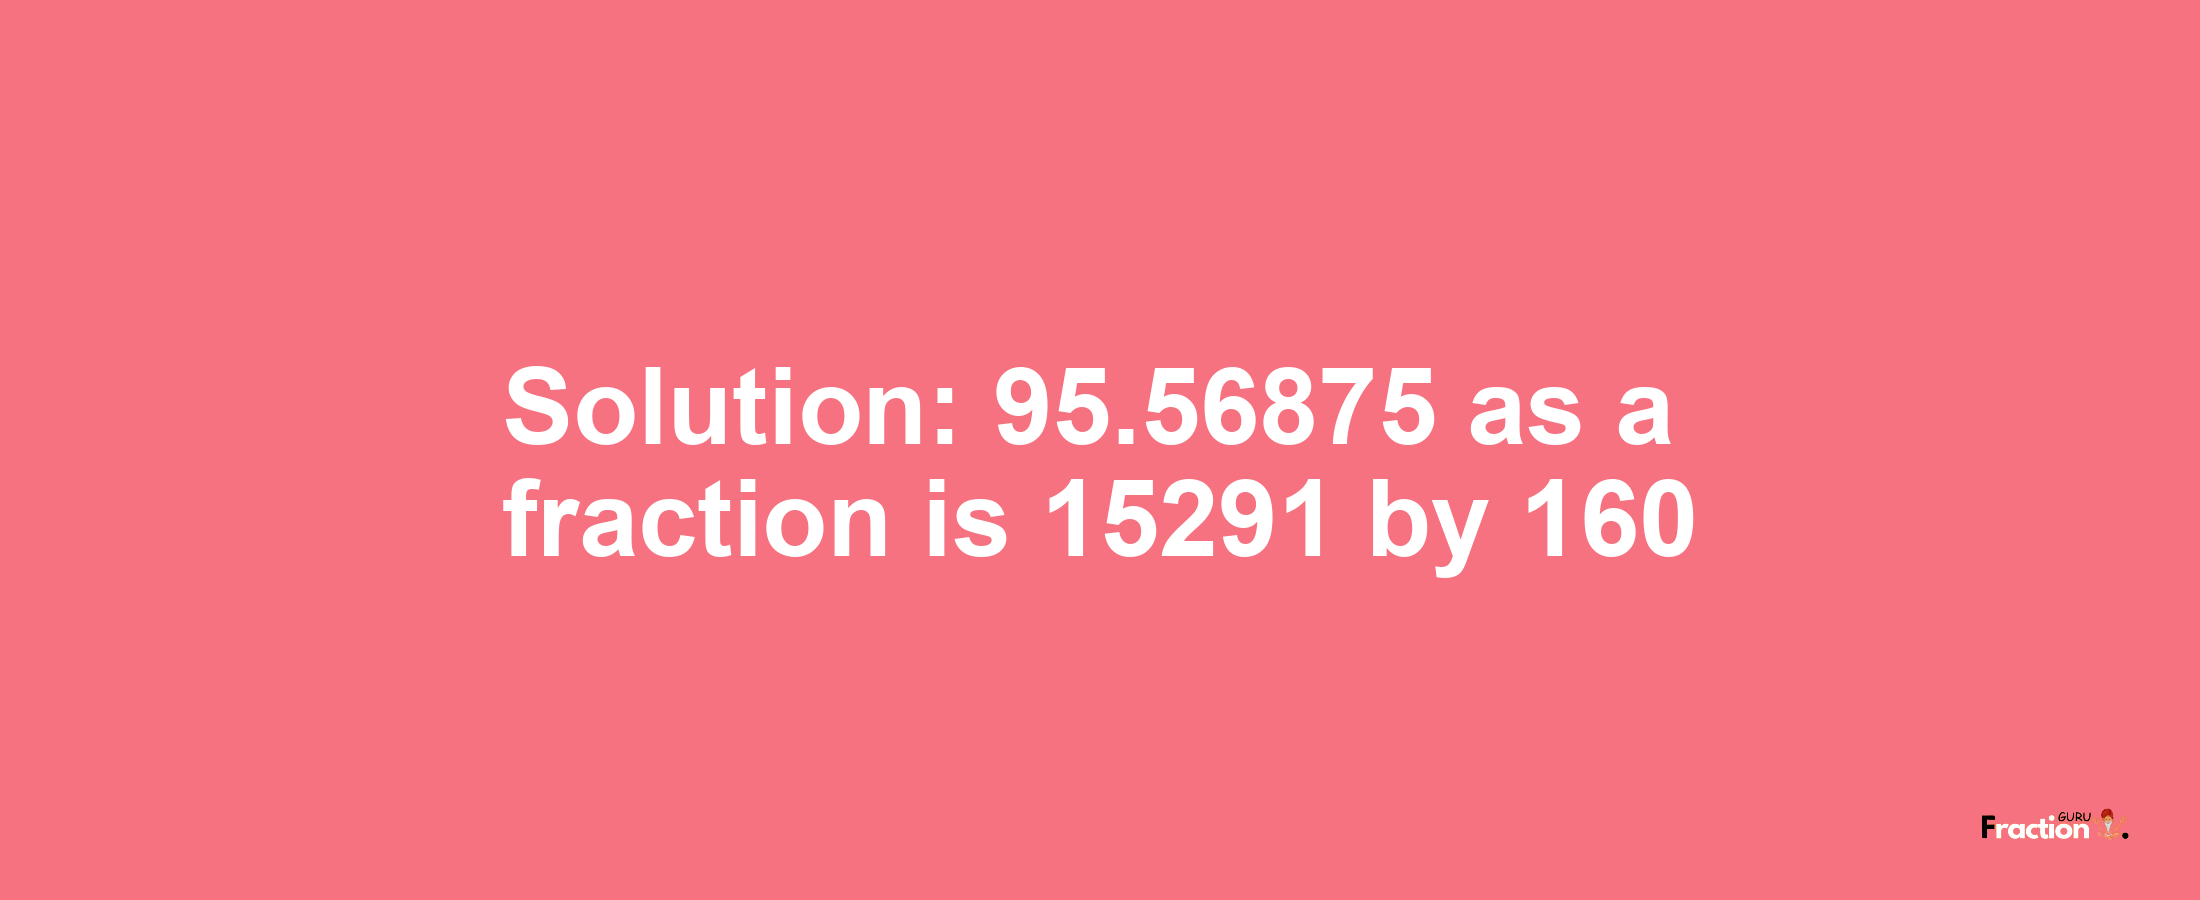 Solution:95.56875 as a fraction is 15291/160